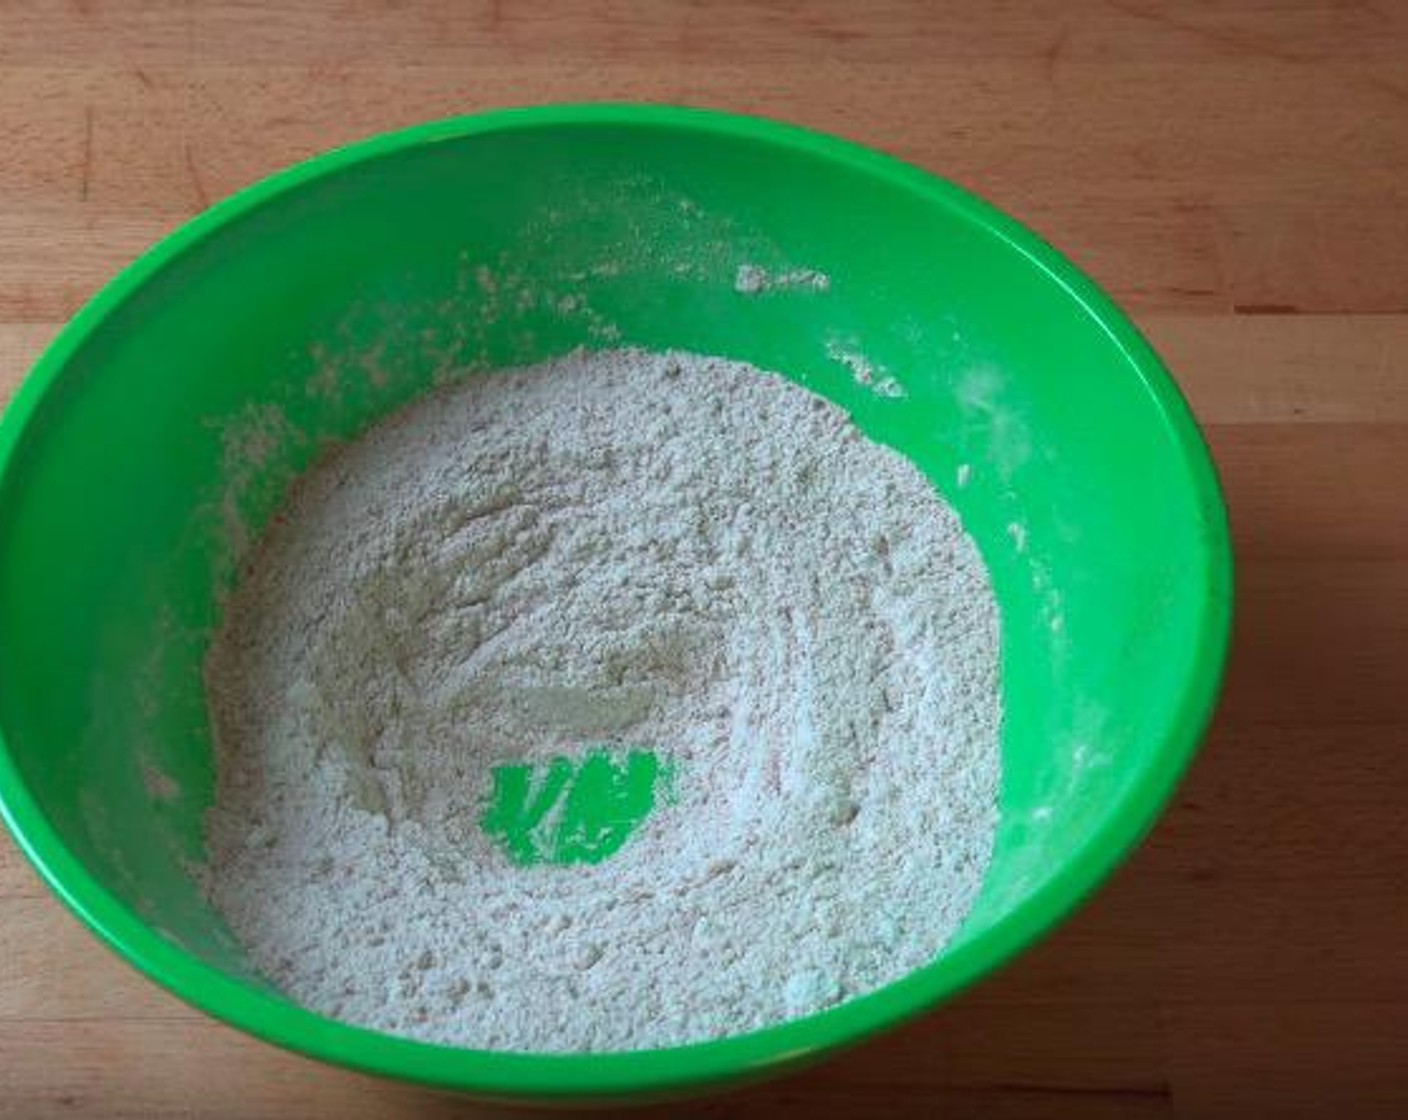 step 1 In a large mixing bowl, add All-Purpose Flour (1 cup), Baking Powder (3/4 tsp), Baking Soda (3/4 tsp), Brown Sugar (1/3 cup) and Ground Cinnamon (1 tsp). Mix together.